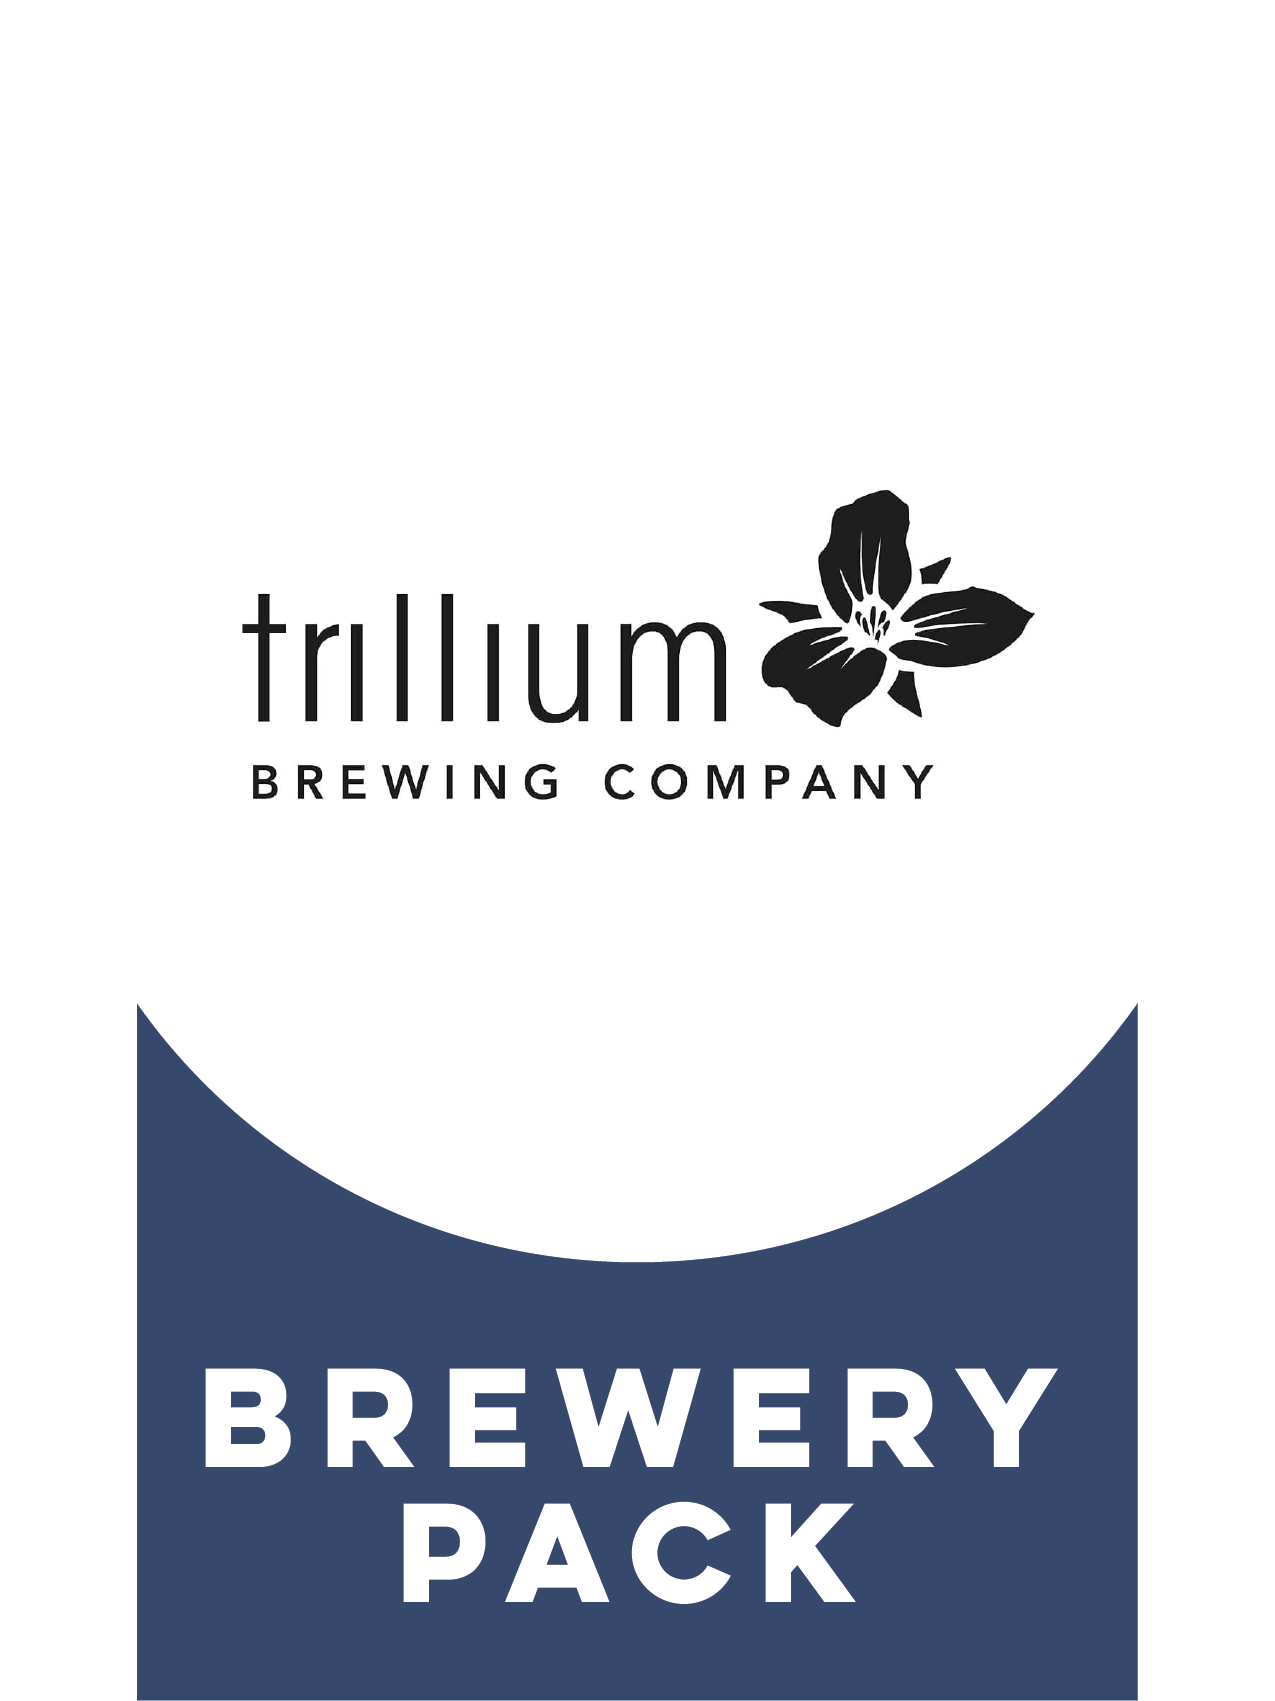 -Trillium- Trillium Brewery Pack-Packs & Cases- Only @ Beer Republic - The best online beer store for American & Canadian craft beer - Buy beer online from the USA and Canada - Bier online kopen - Amerikaans bier kopen - Craft beer store - Craft beer kopen - Amerikanisch bier kaufen - Bier online kaufen - Acheter biere online - IPA - Stout - Porter - New England IPA - Hazy IPA - Imperial Stout - Barrel Aged - Barrel Aged Imperial Stout - Brown - Dark beer - Blond - Blonde - Pilsner - Lager - Wheat - Weizen 